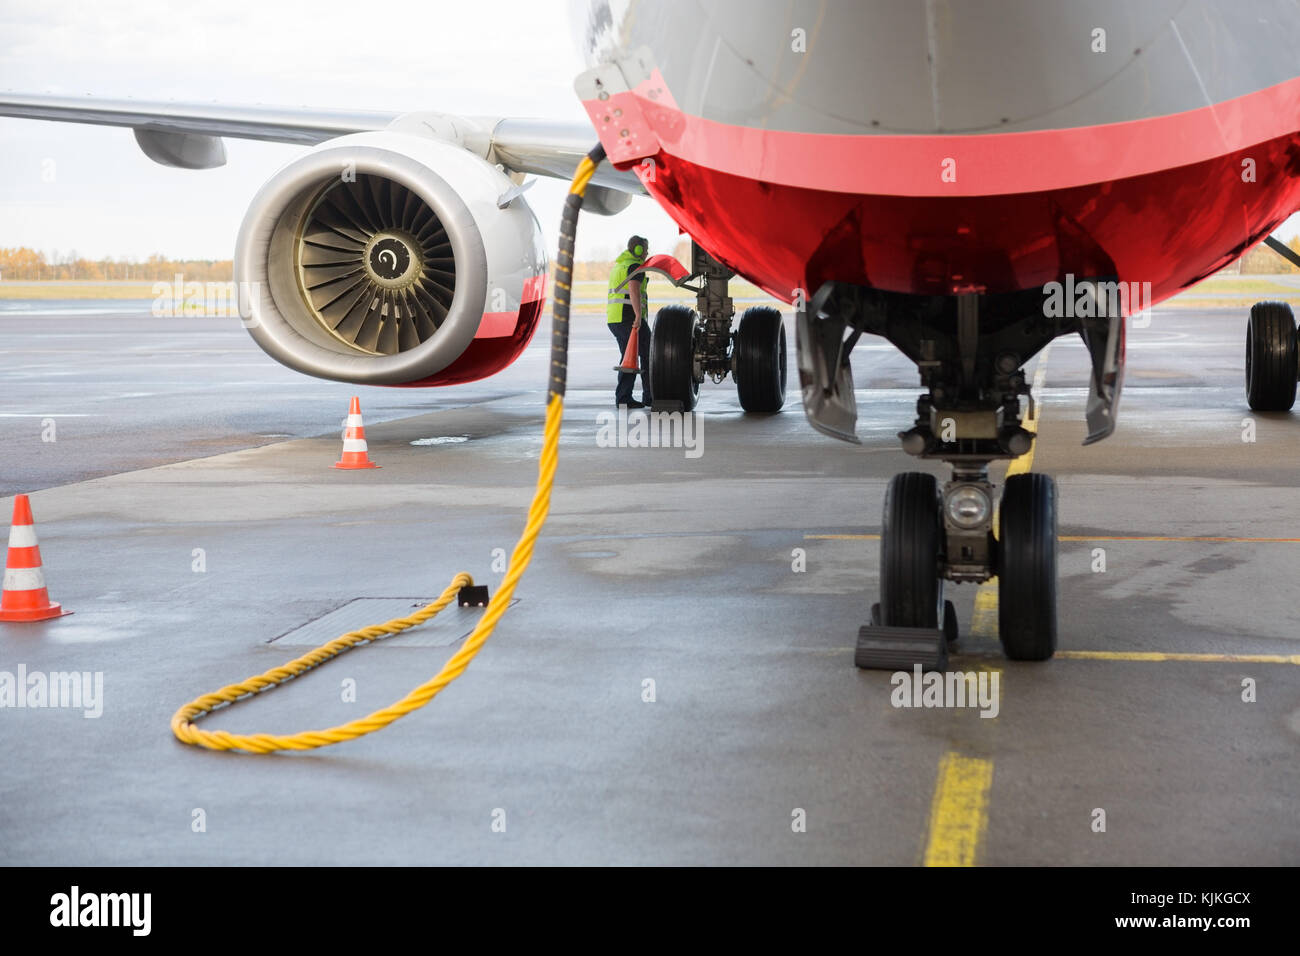 Commercial airplane being charged while worker working on wet runway Stock Photo